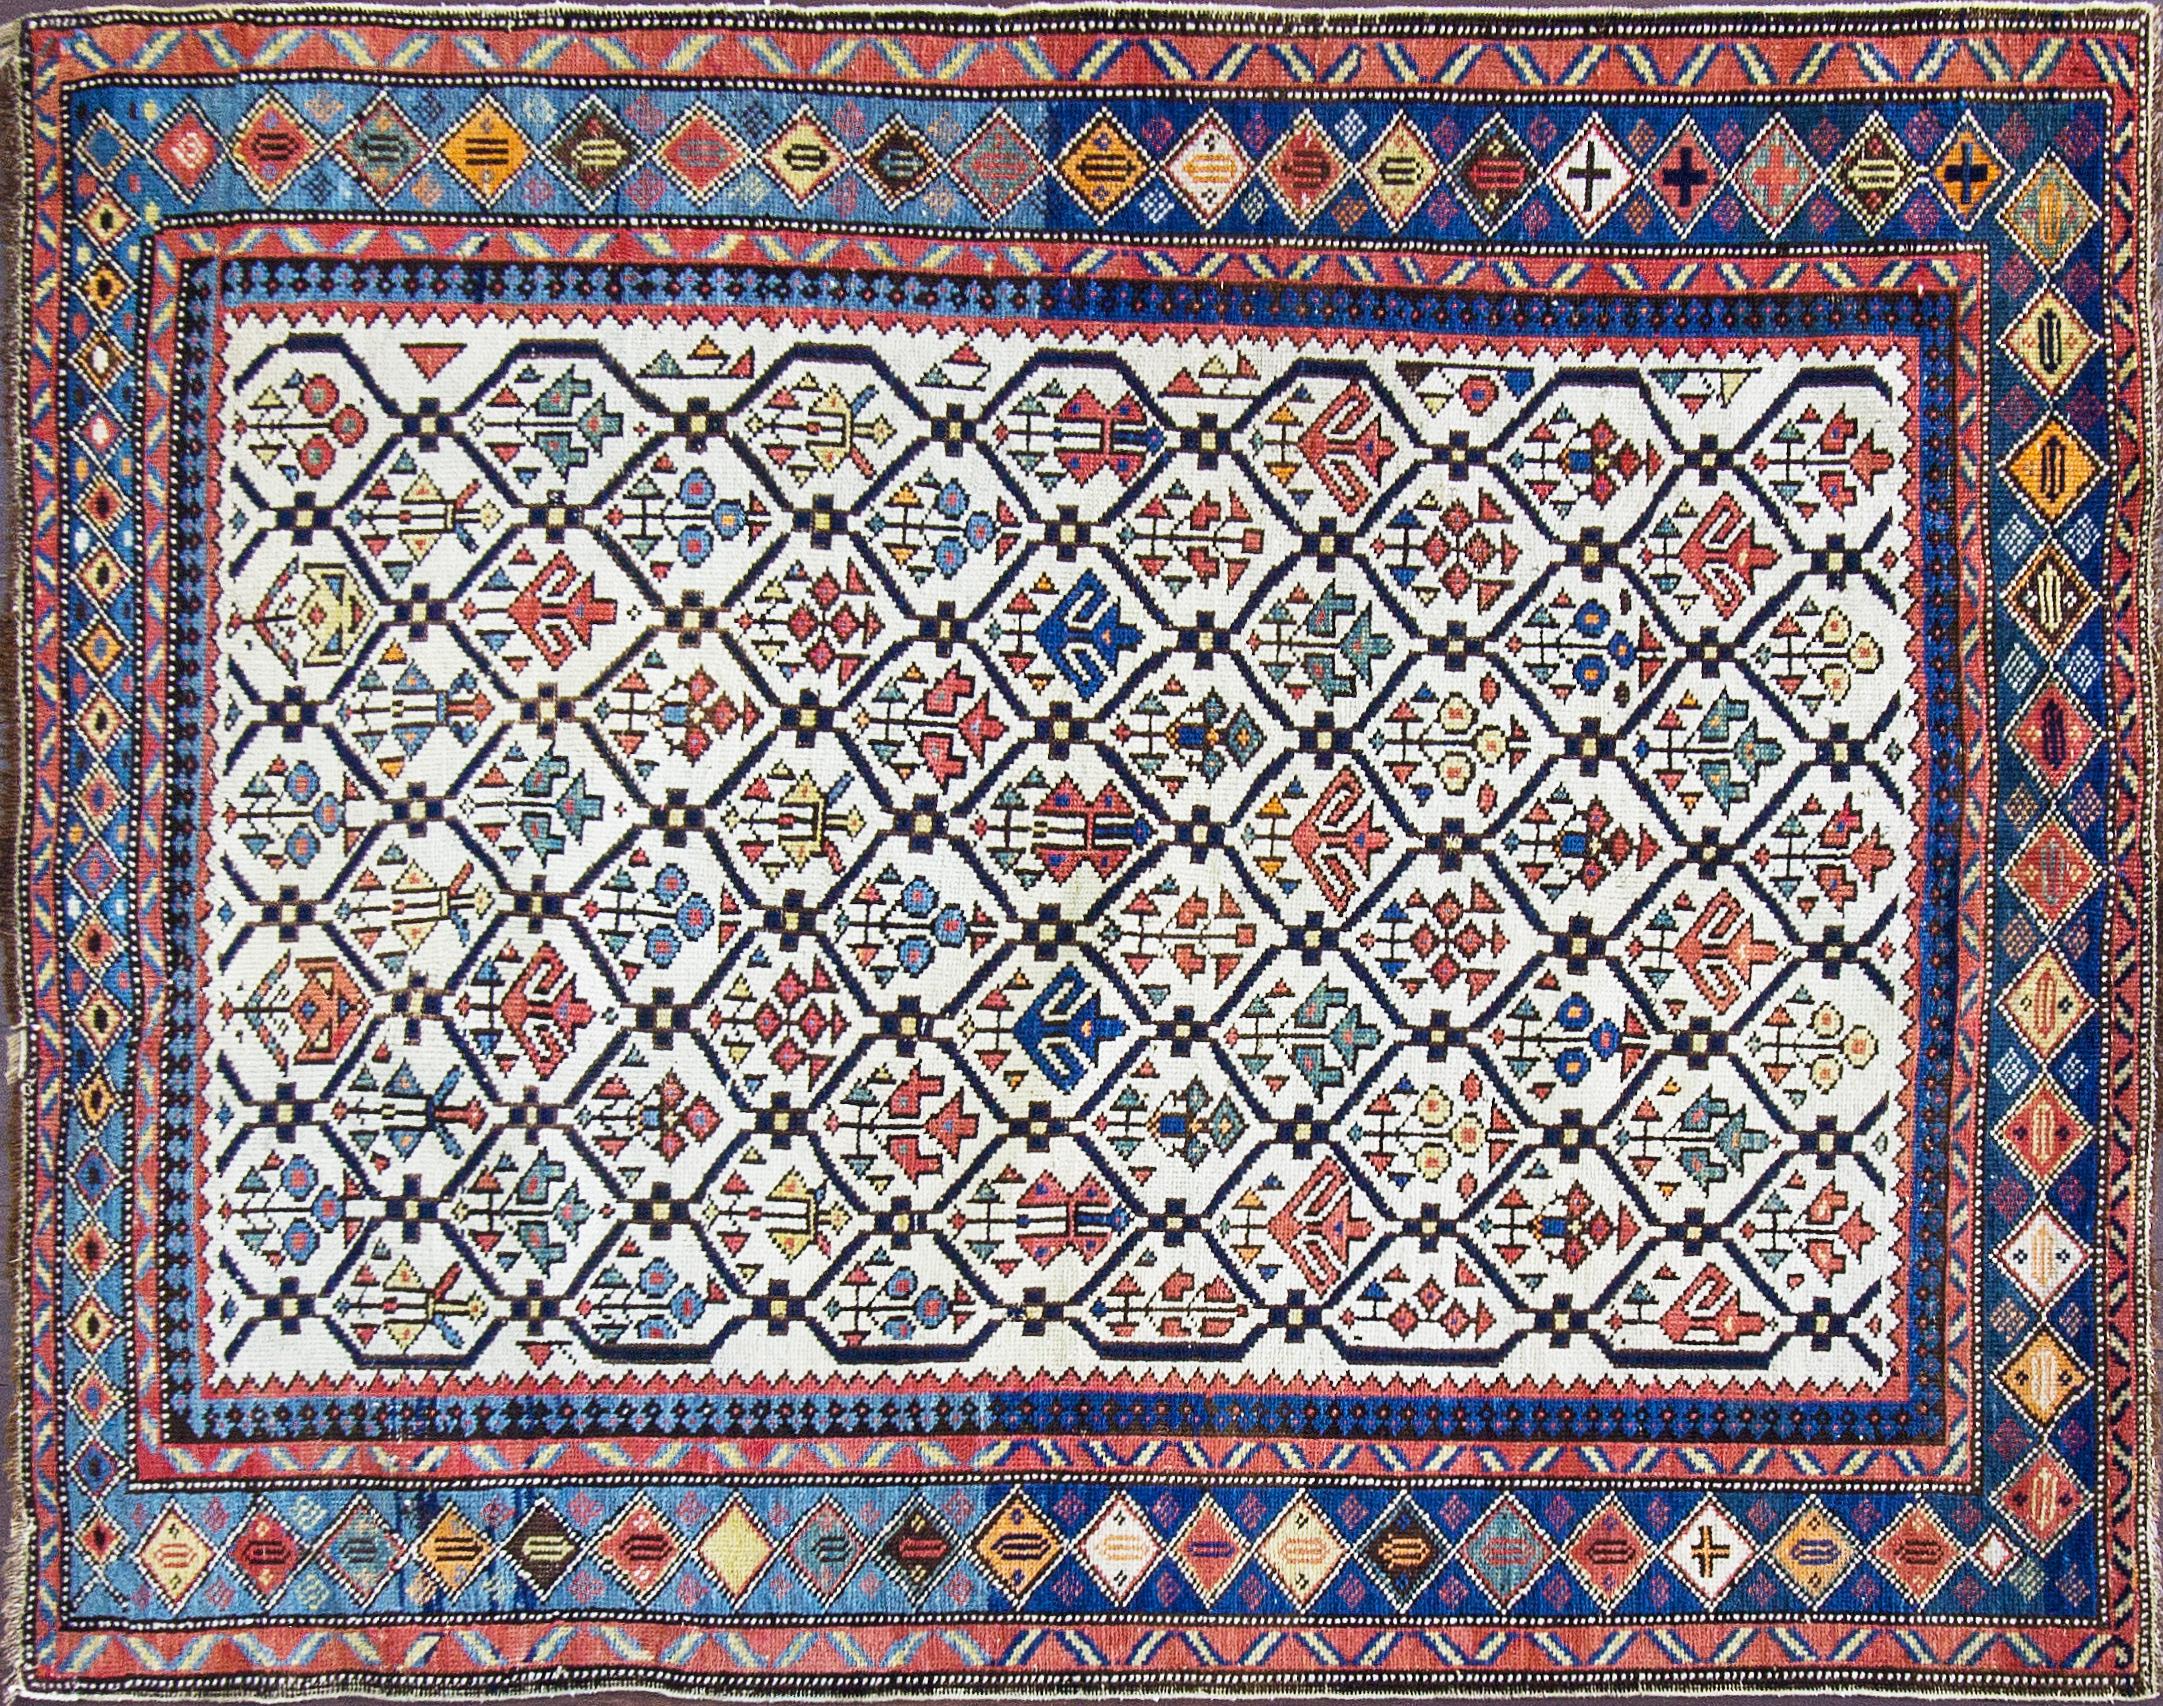 All colors on ivory background Shirvan rug dated circa 1880s.
The historic Khanate or administrative district of Shirvan produced many highly decorative antique rugs that have a formality and stylistic complexity that is found in few rugs from the